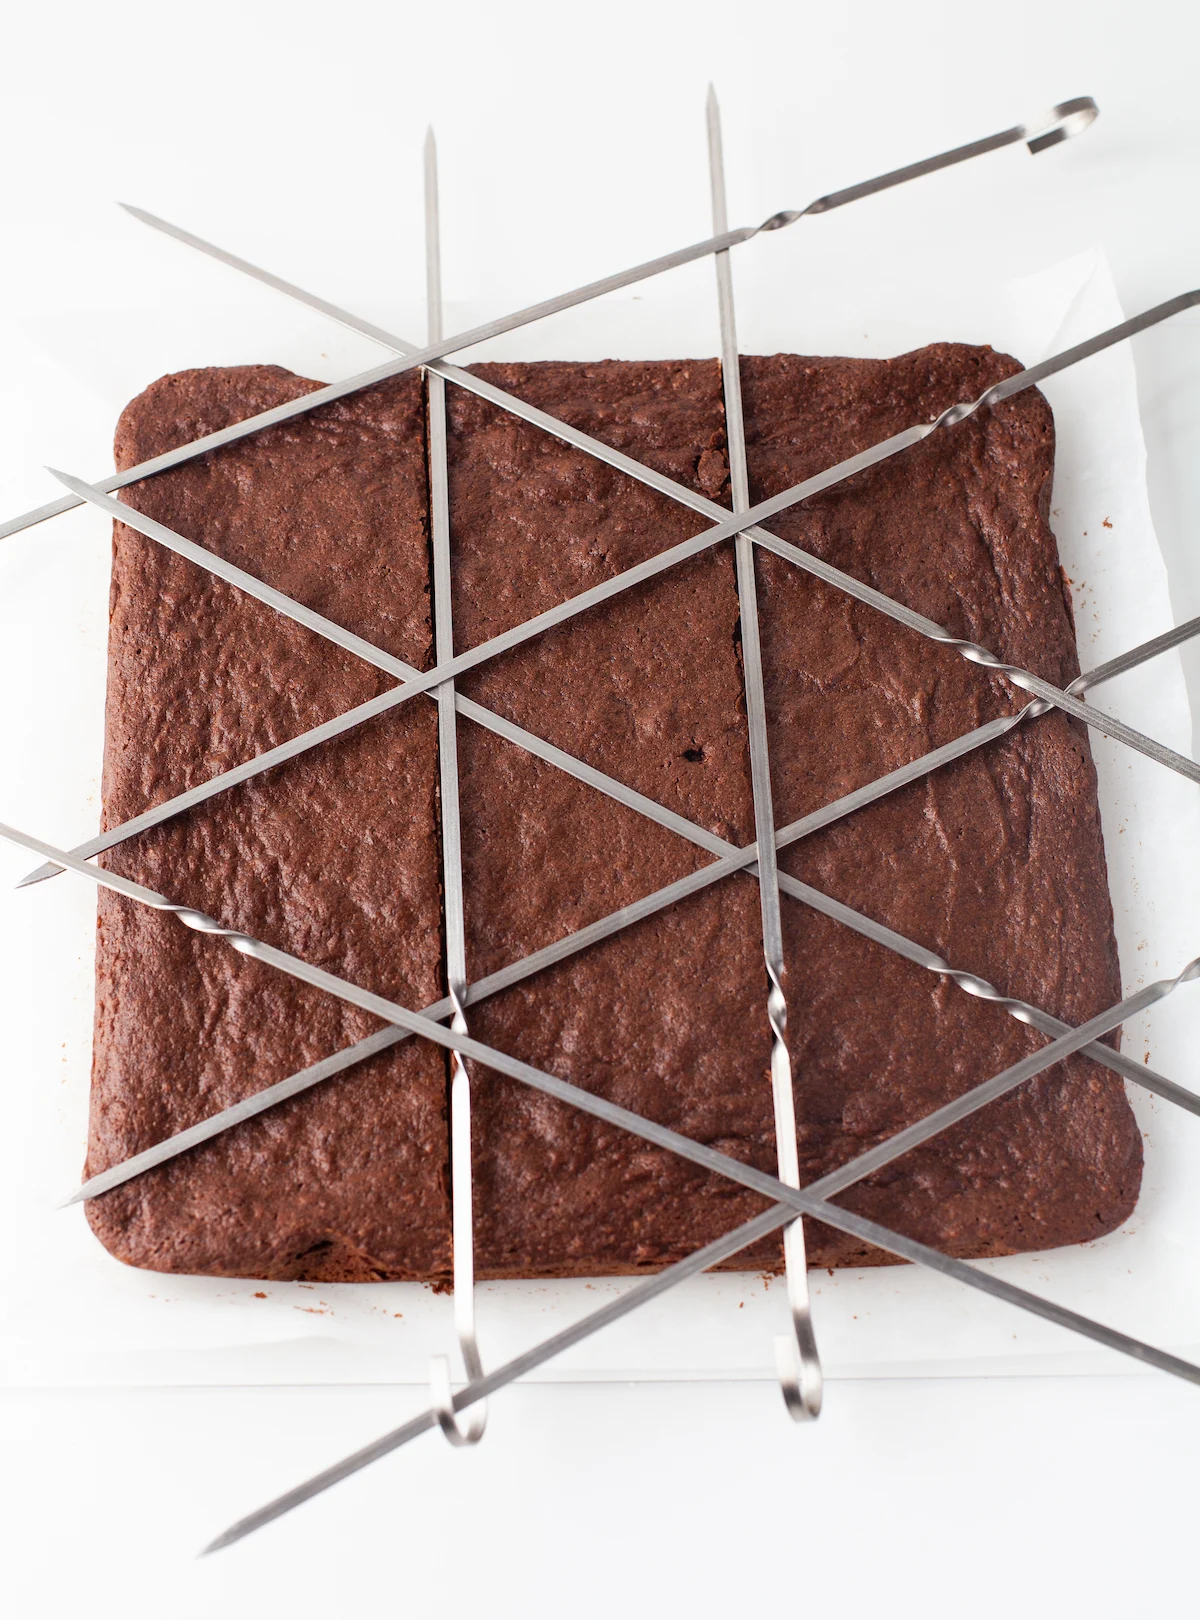 Grid made on the top of the brownies with skewers